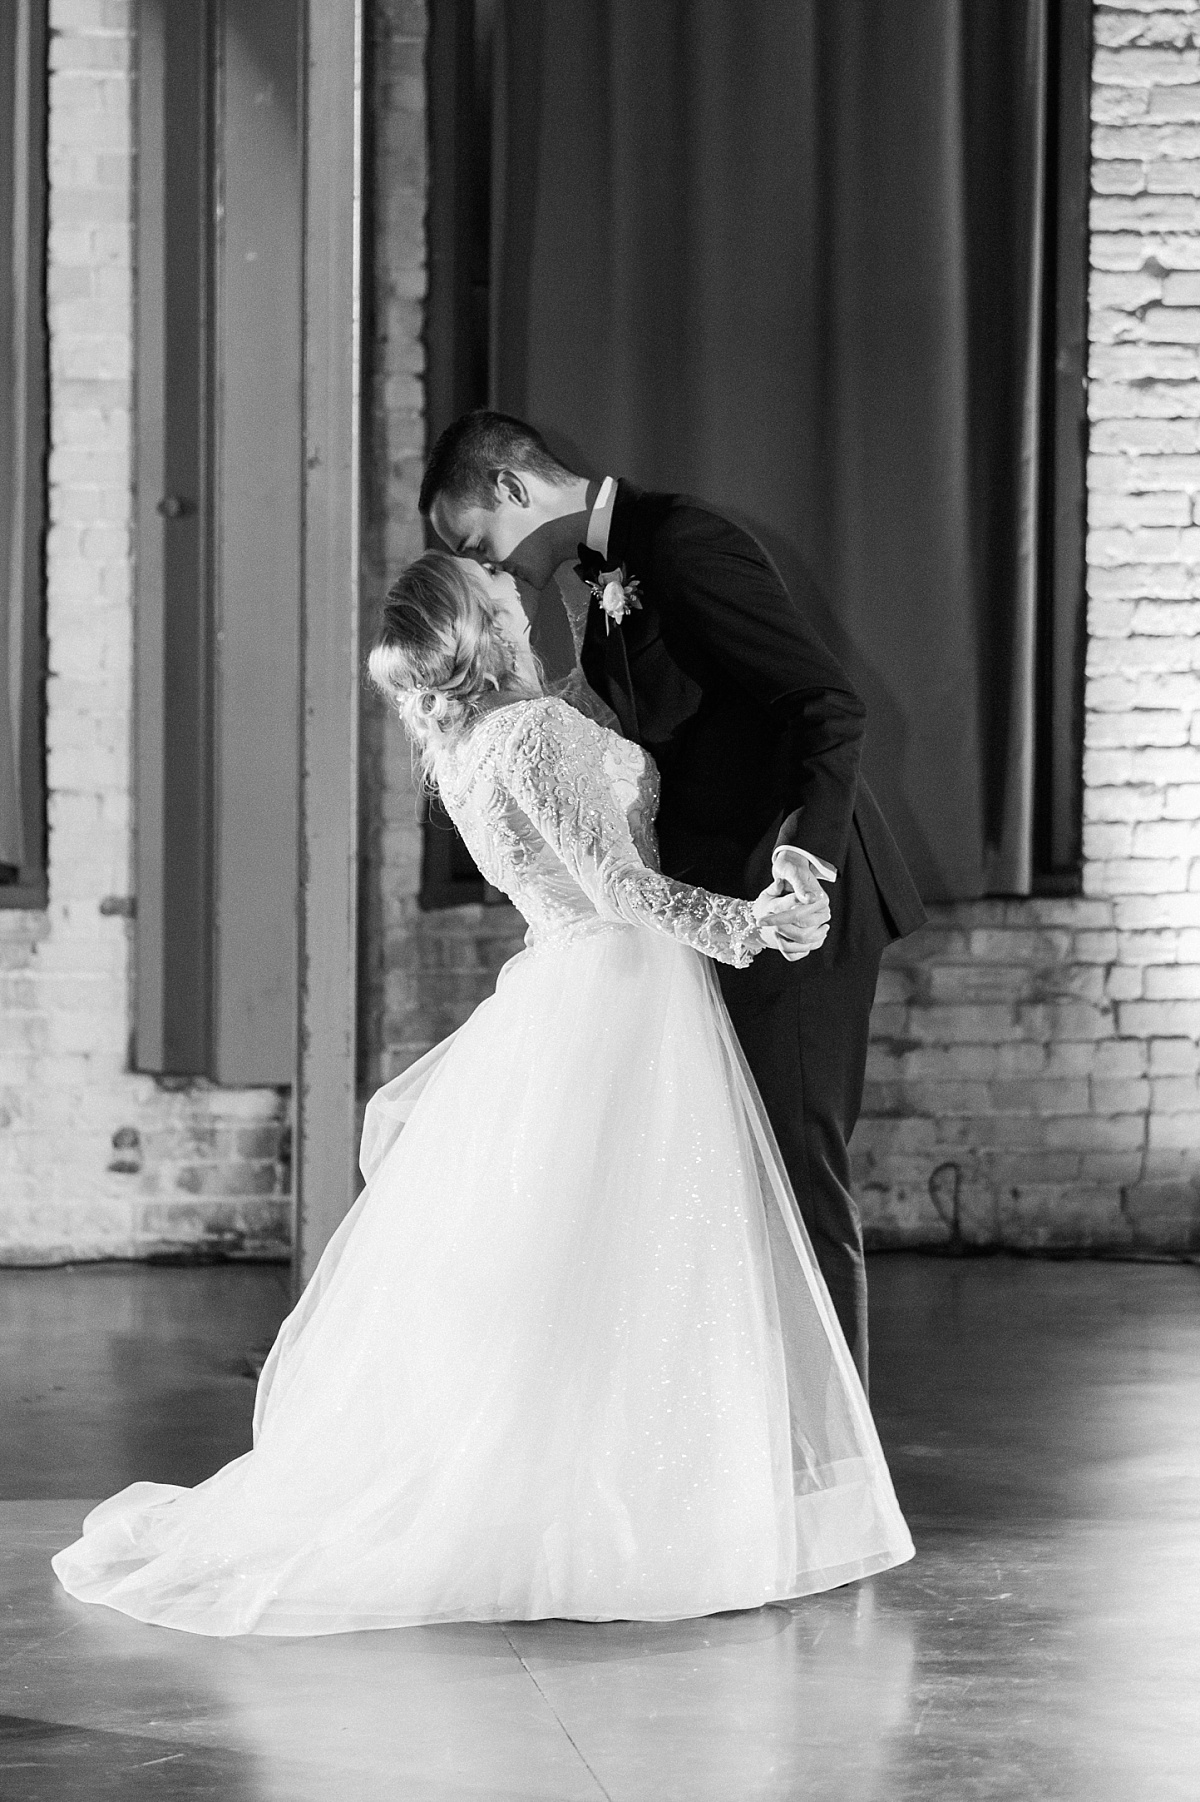 A bride and groom kiss during their first dance at their wedding in Duluth, Minnesota wedding venue Clyde Iron Works.